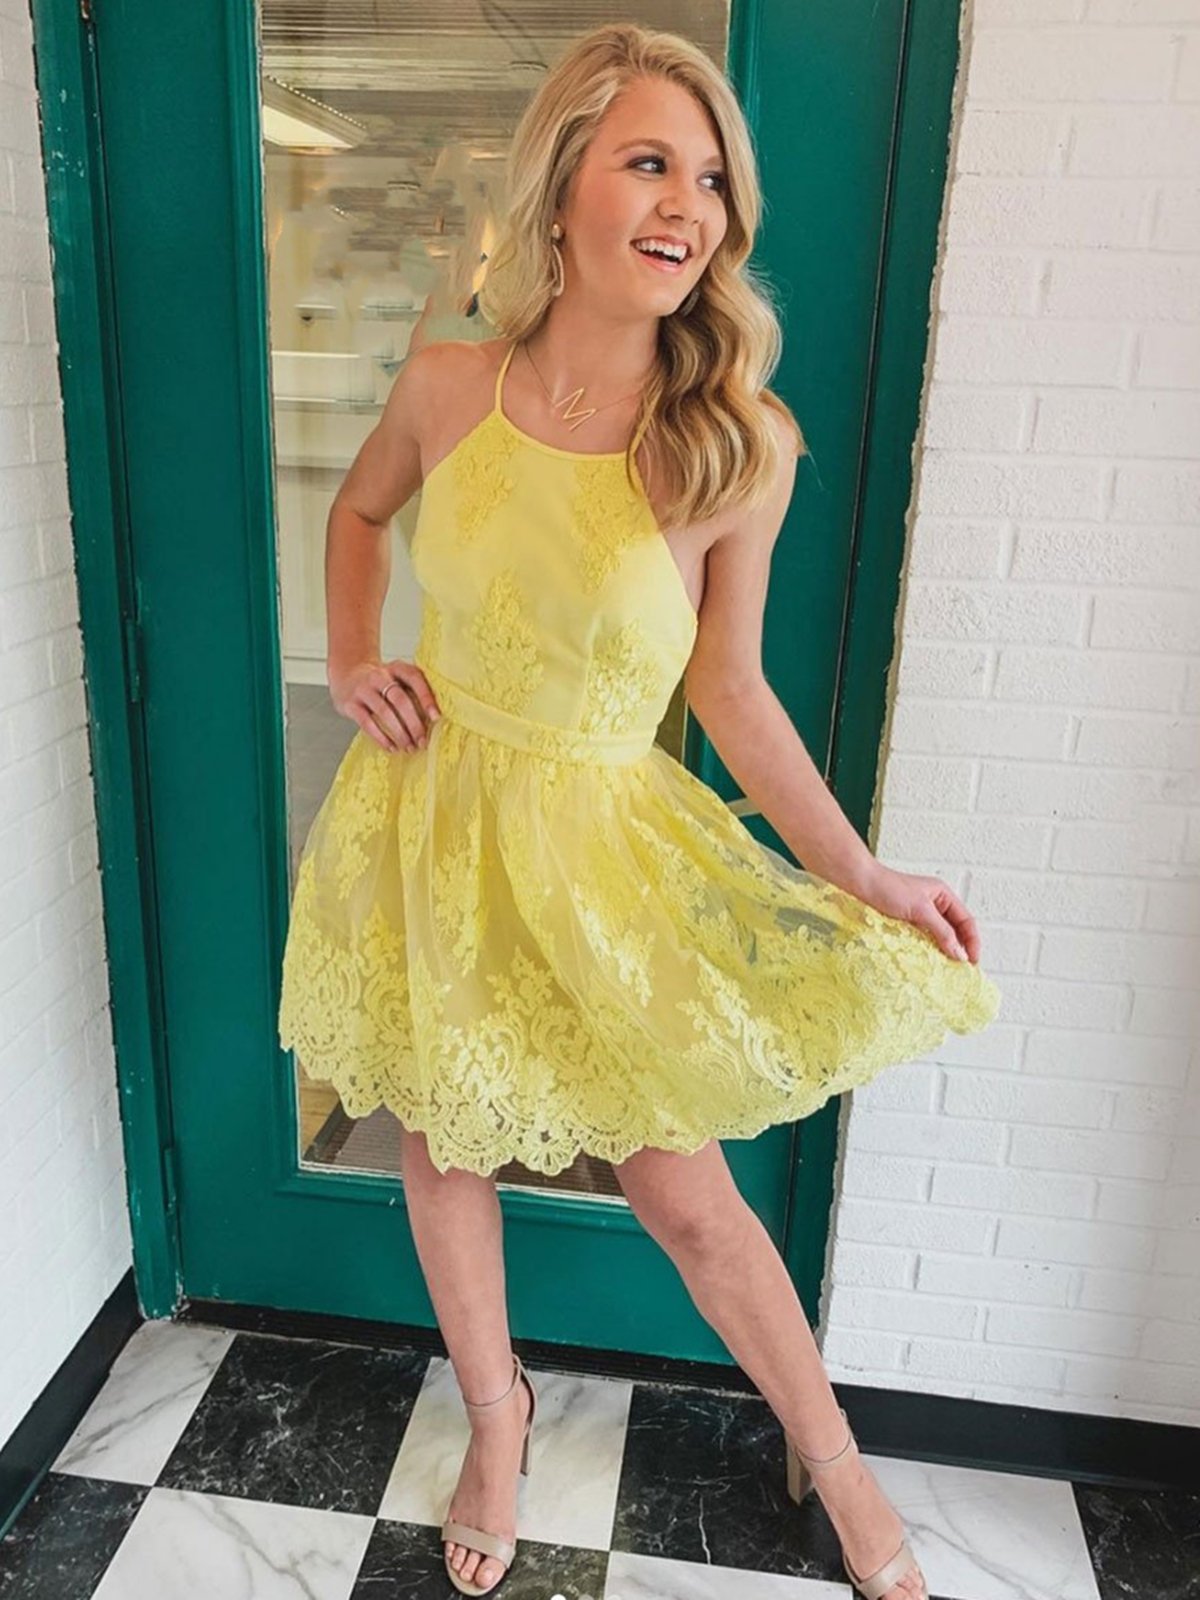 Backless Short Yellow Lace Prom Dresses, Open Back Short Yellow Lace Graduation Homecoming Dresses